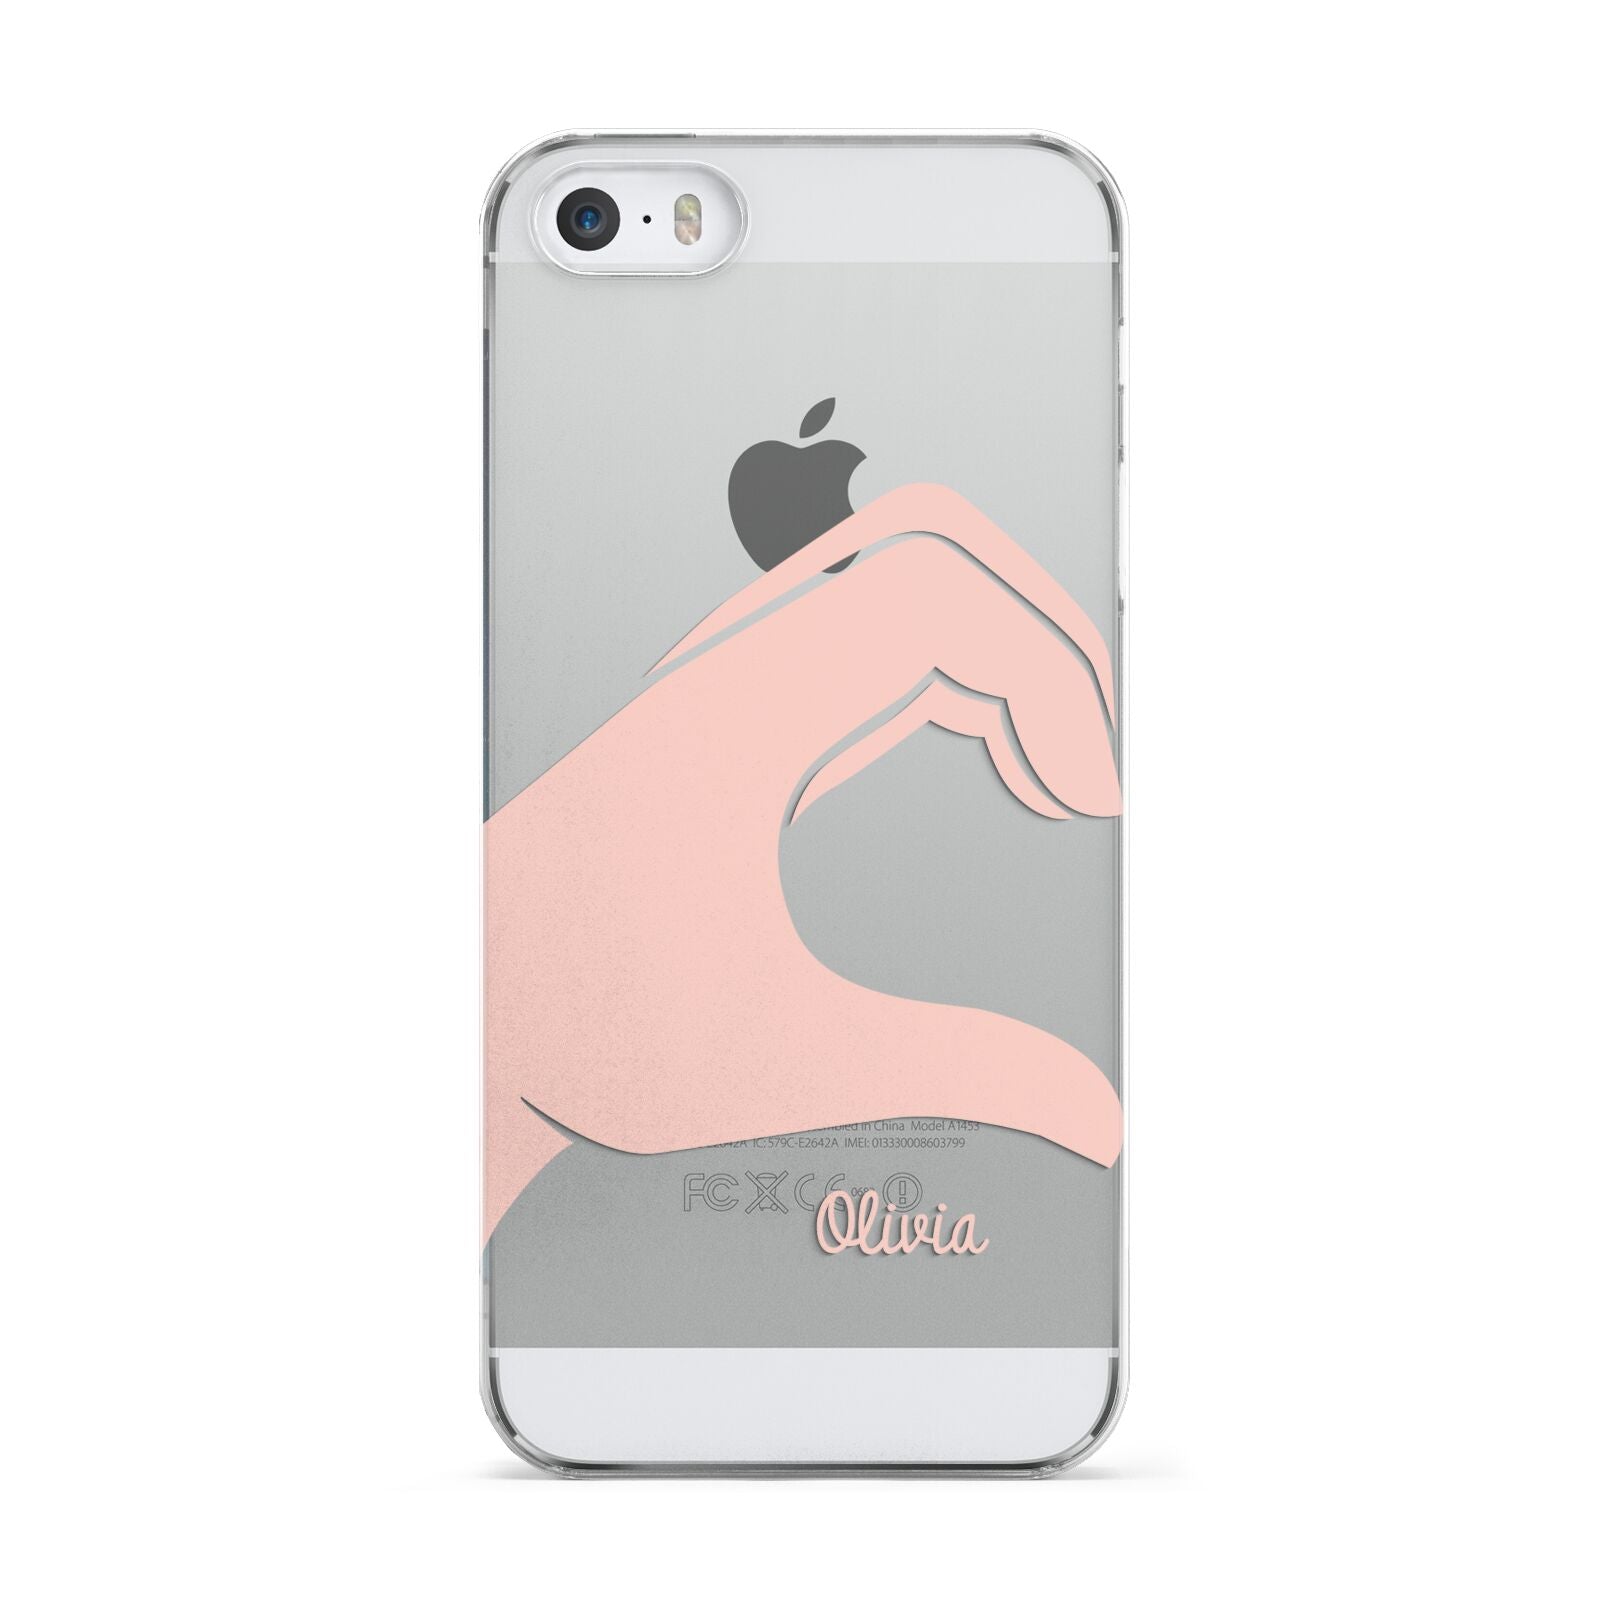 Left Hand in Half Heart with Name Apple iPhone 5 Case